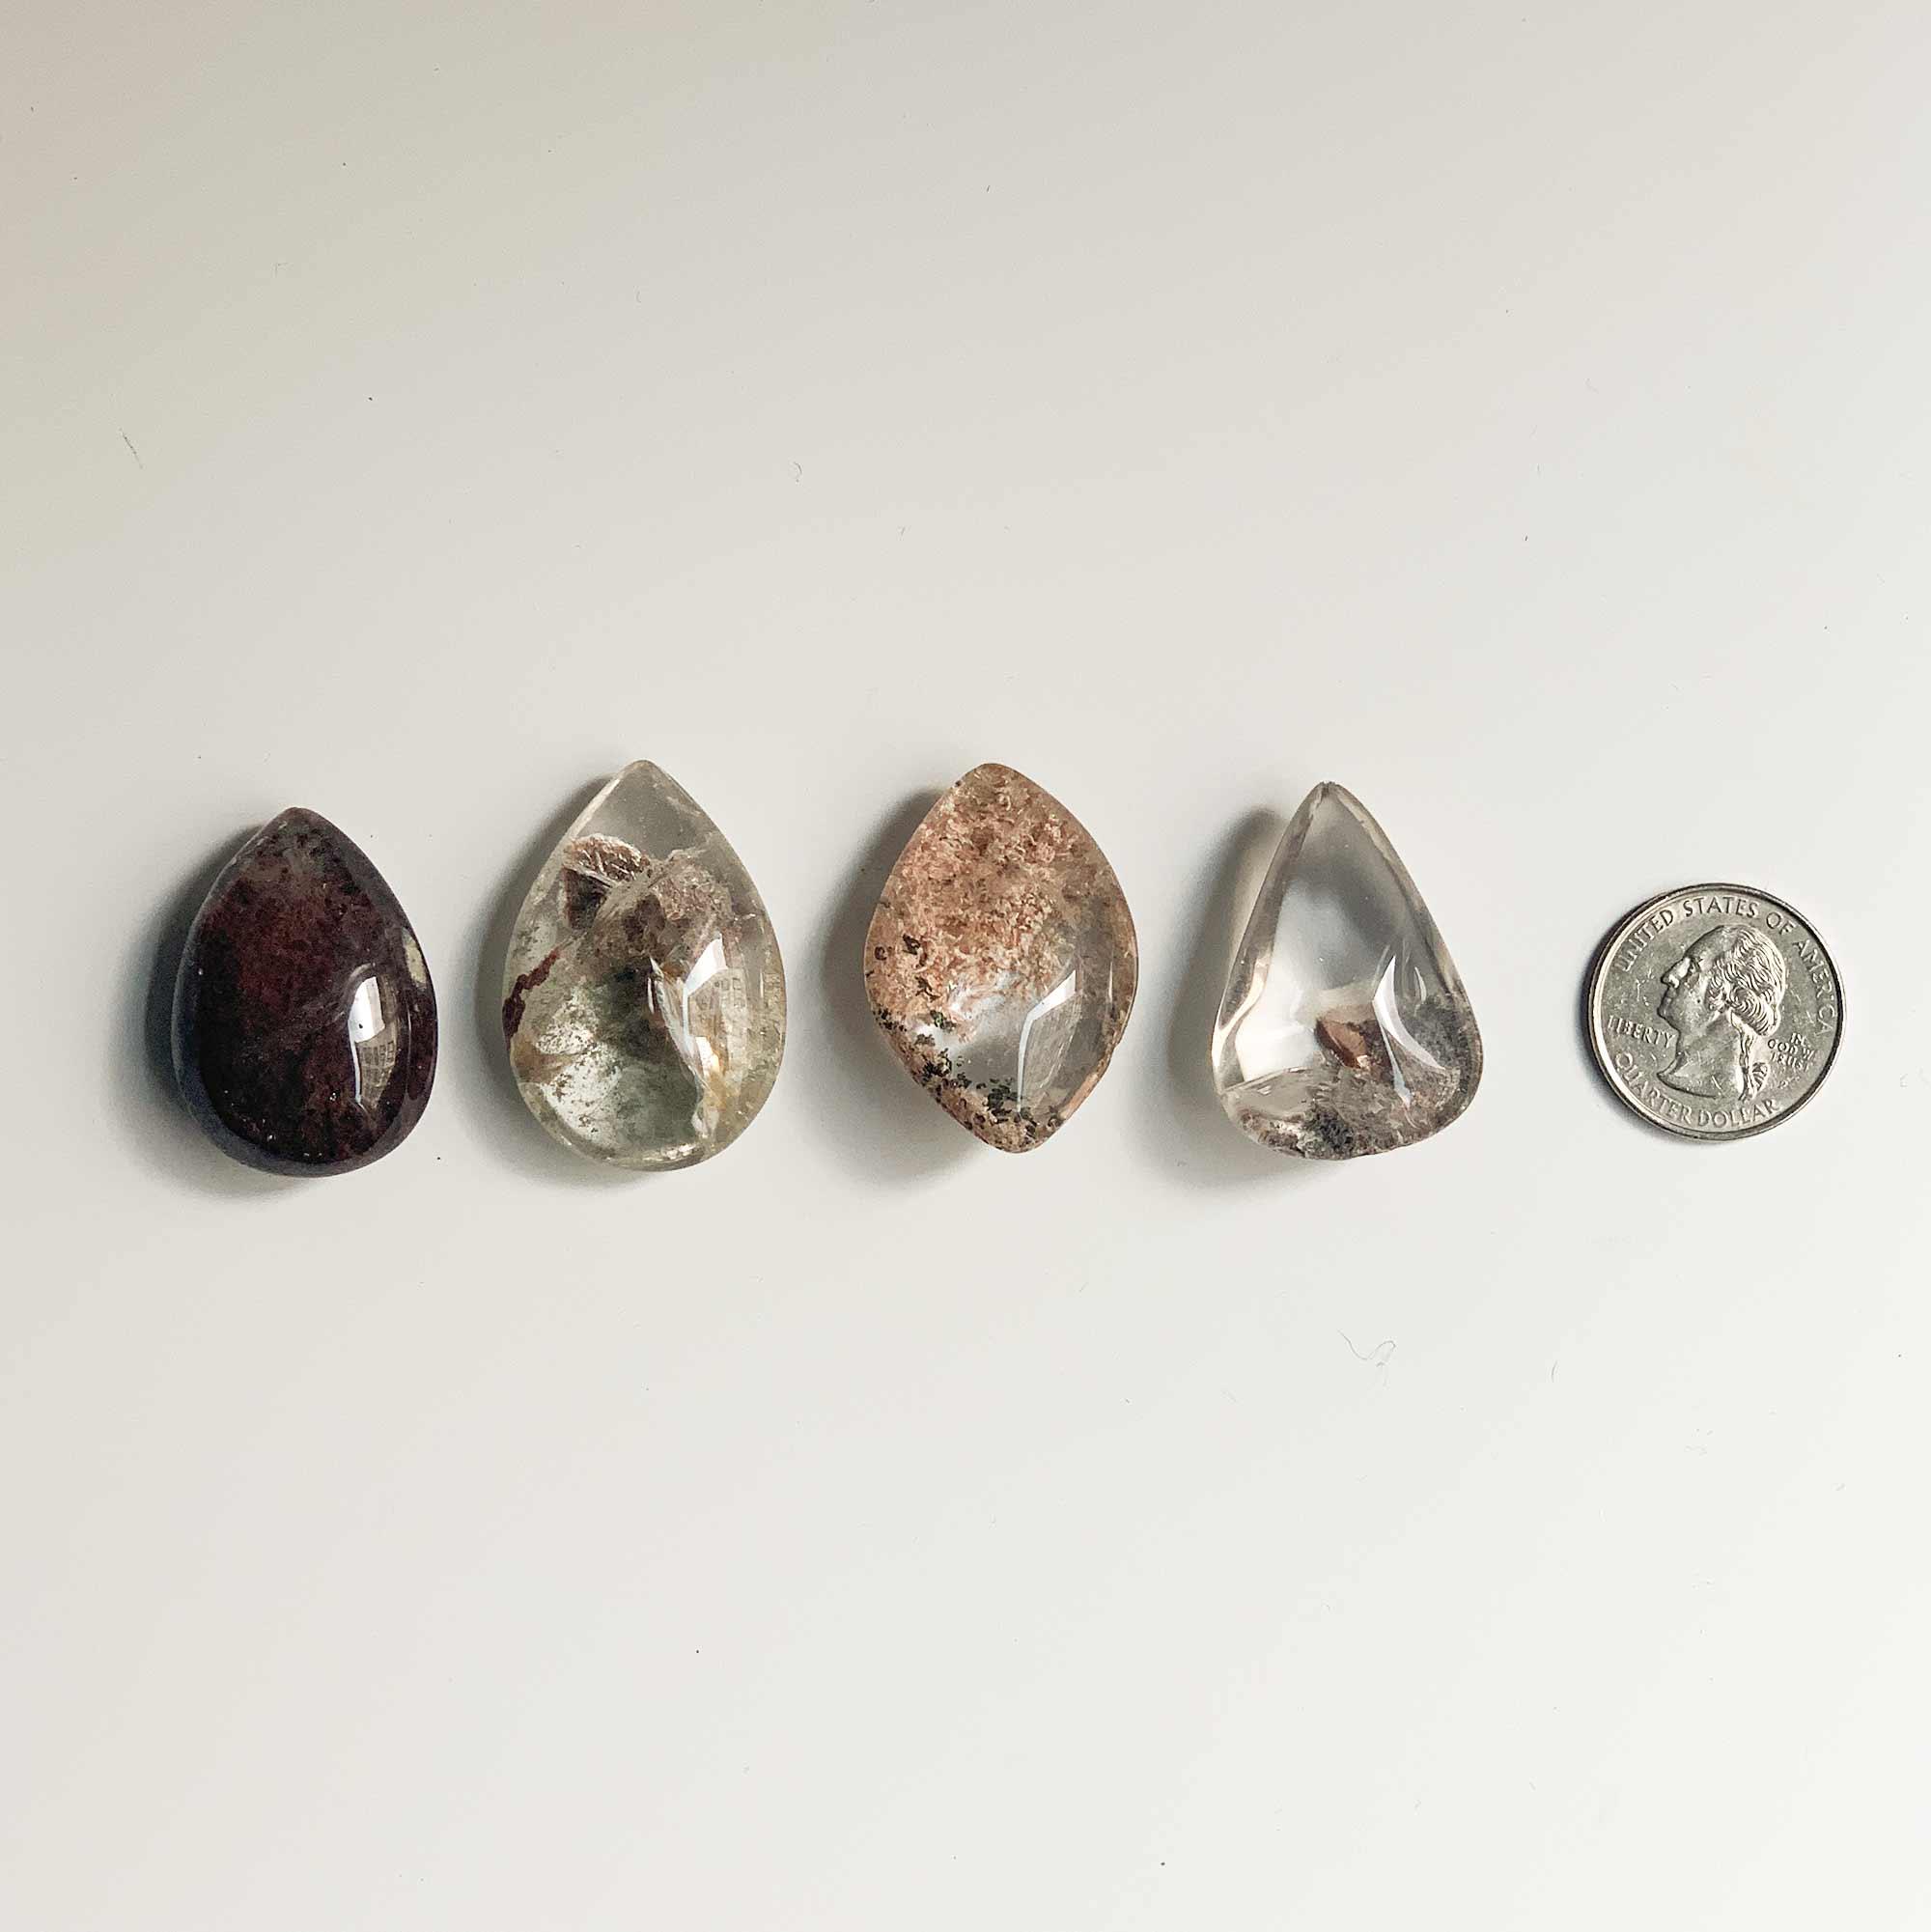 4 different shapes and colors of garden quartz and quarter coin